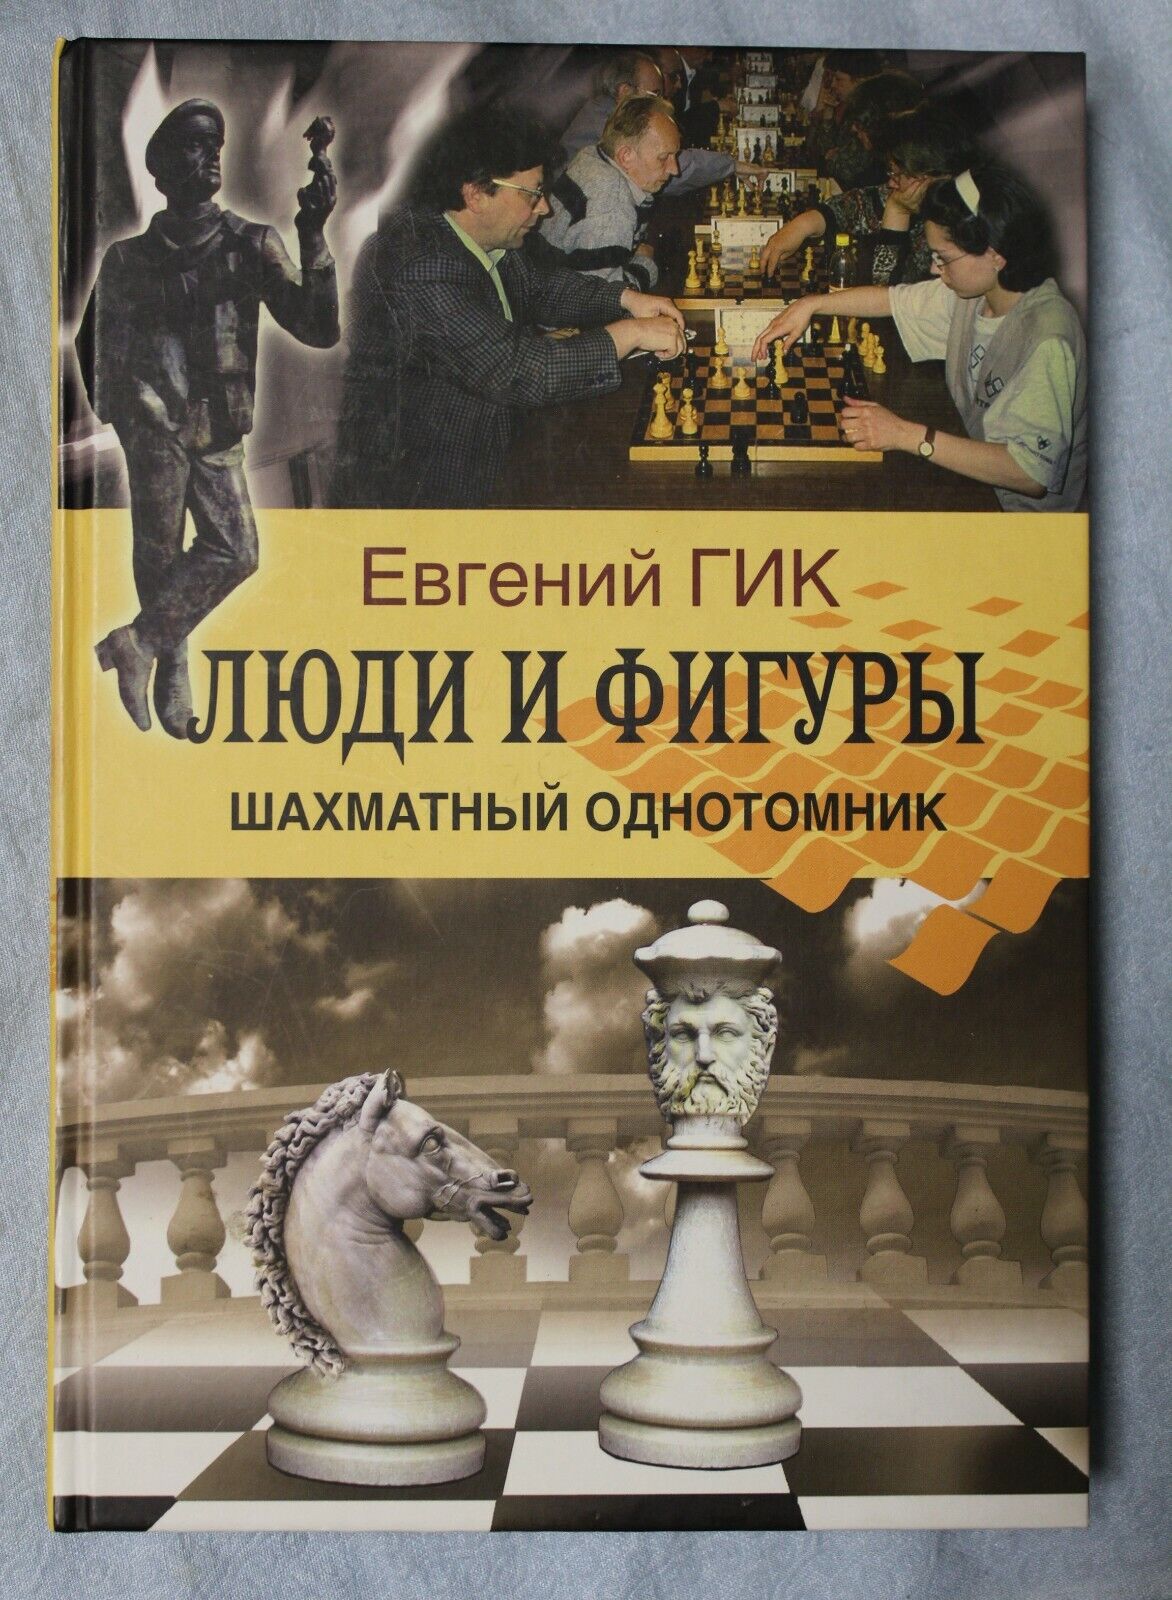 11121.Chess book: signed Gik for Rimma Bilunova, People and Figures w photoes, 2013